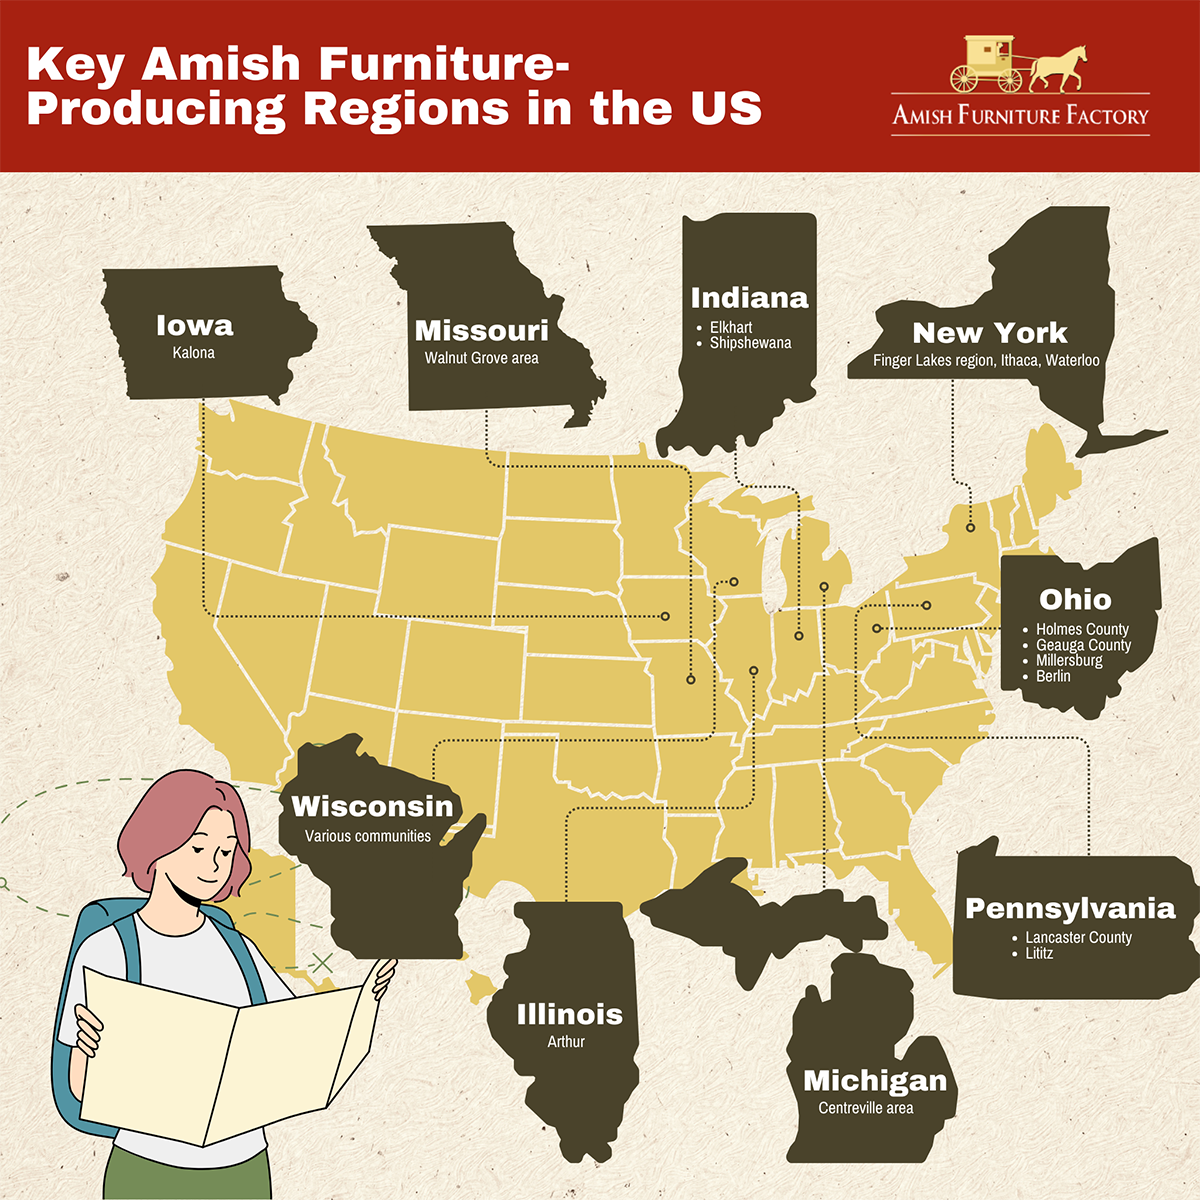 The key Amish furniture-producing regions in the US.